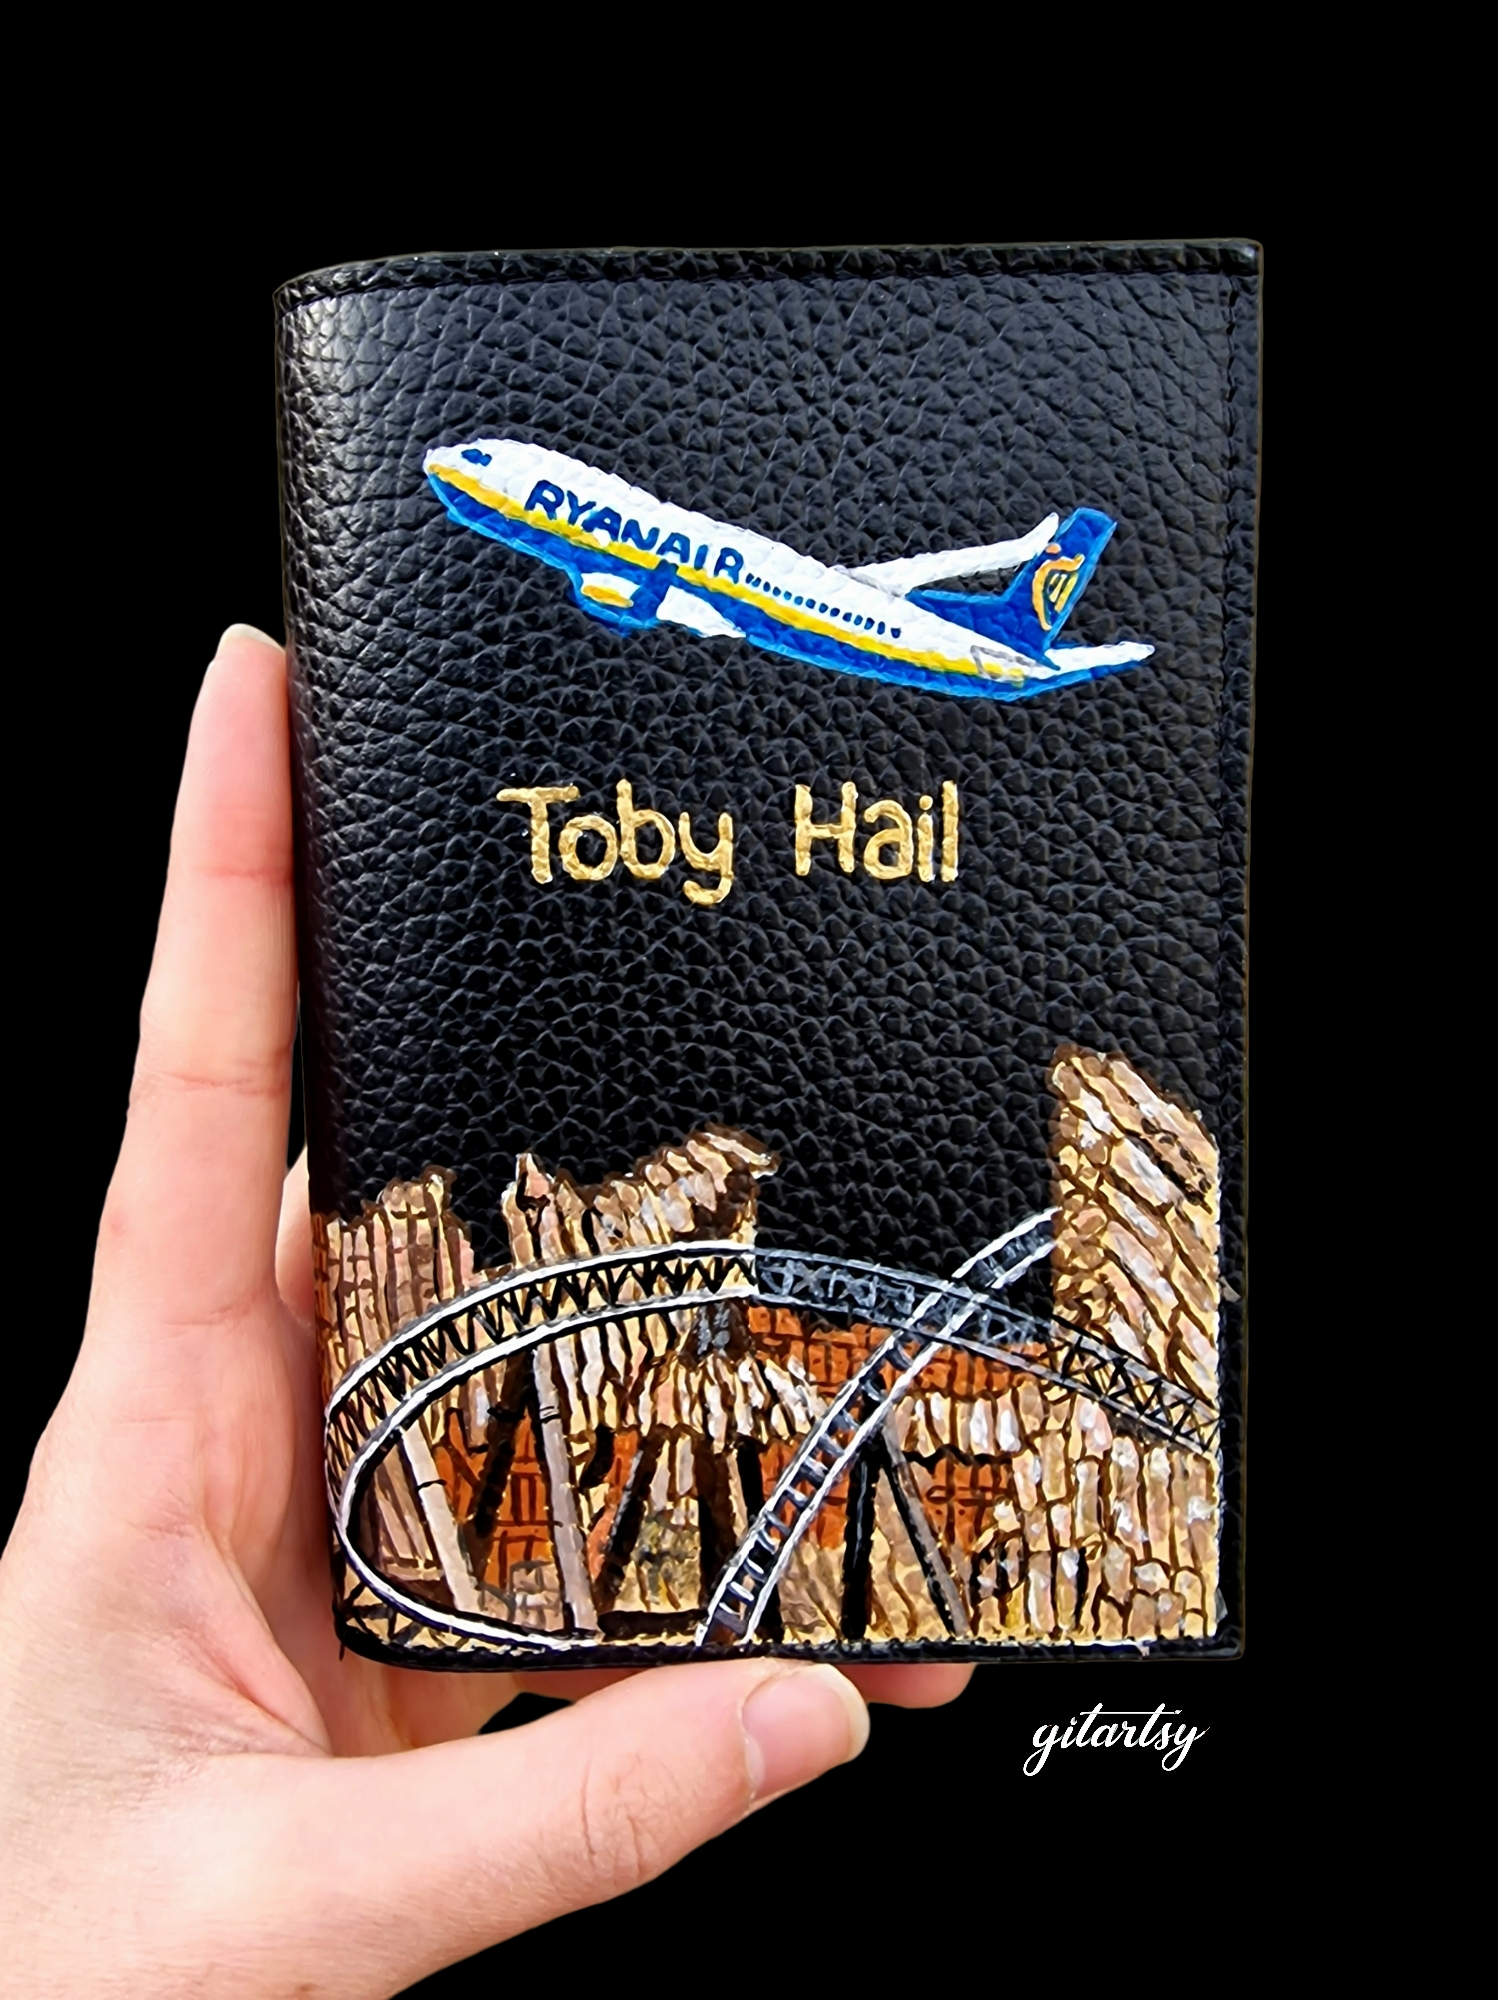 Personalised leather wallet for "Toby Hail" with aeroplane and rollercoaster 